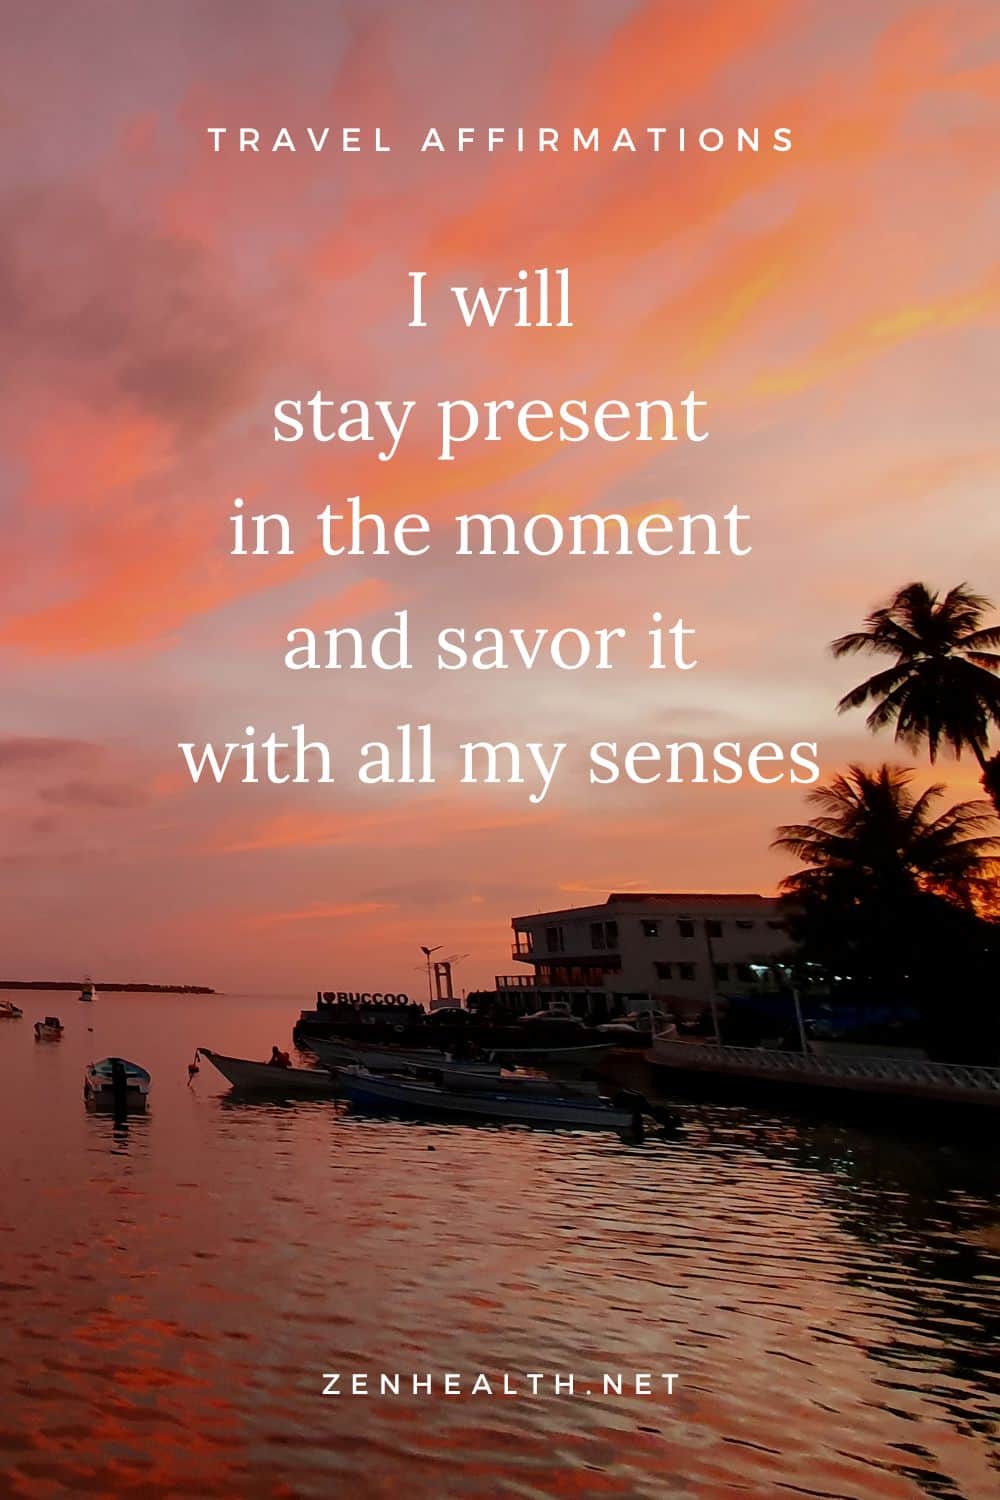 travel affirmations: I will stay present in the moment and savor it with all my senses